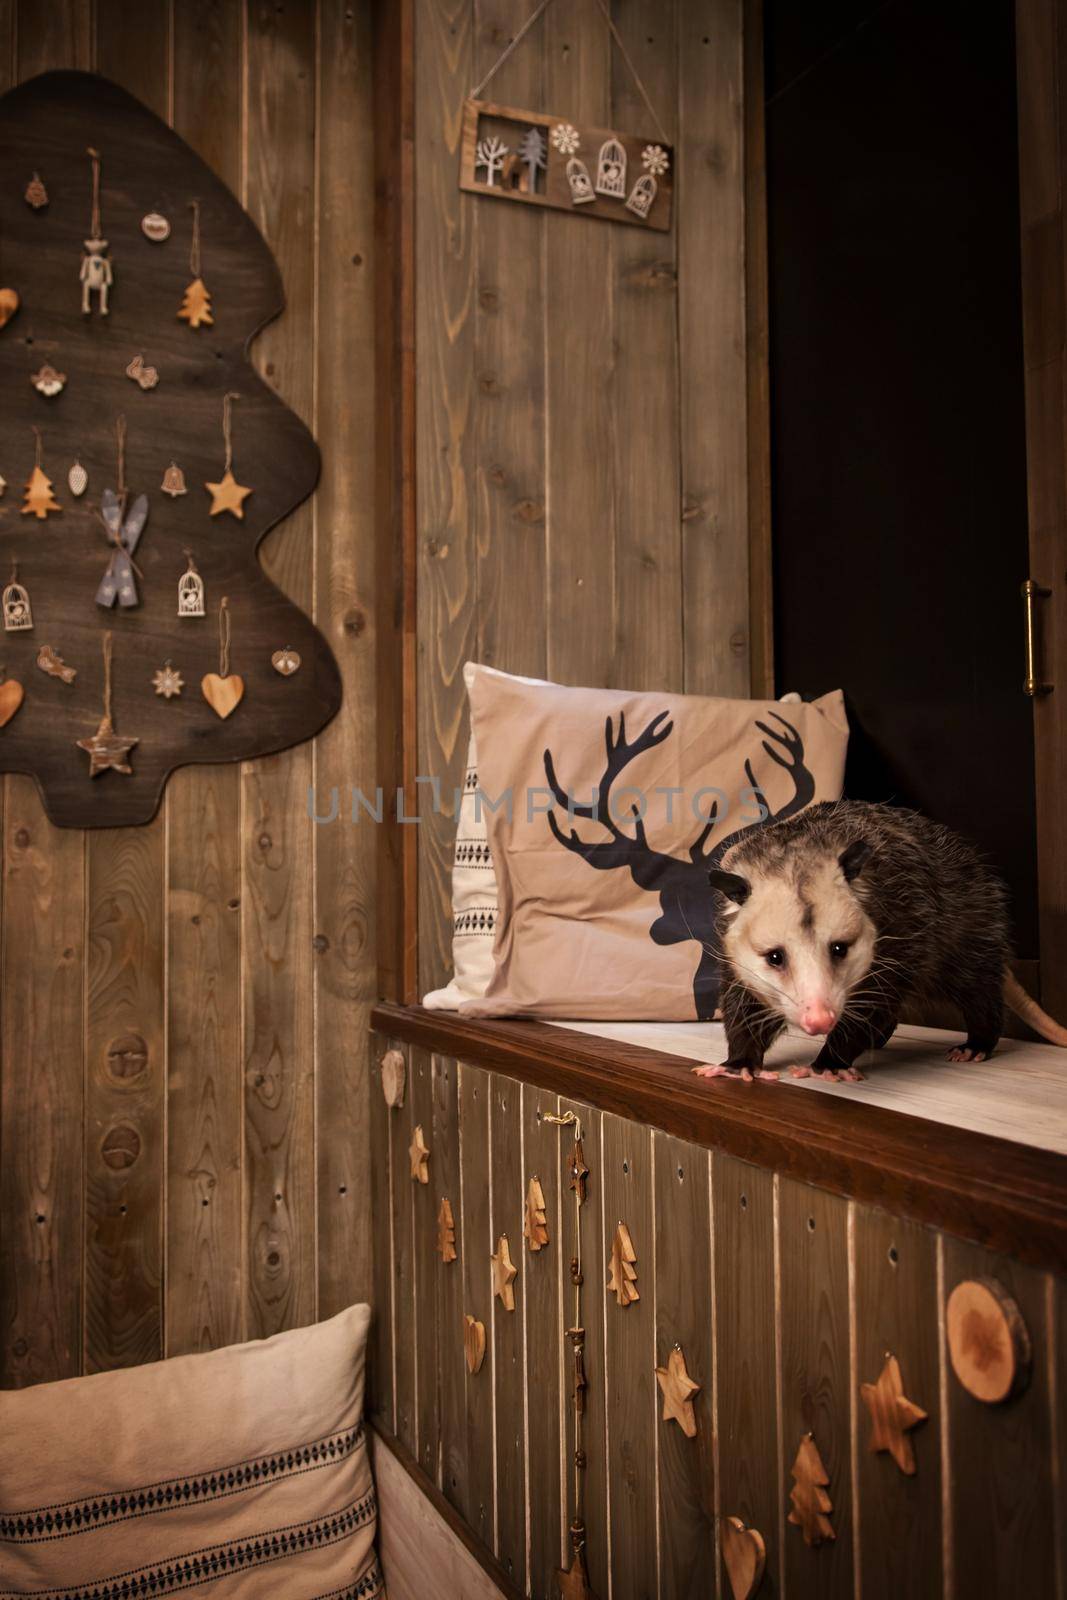 The Virginia opossum in decorated room with Christmass tree. by RosaJay